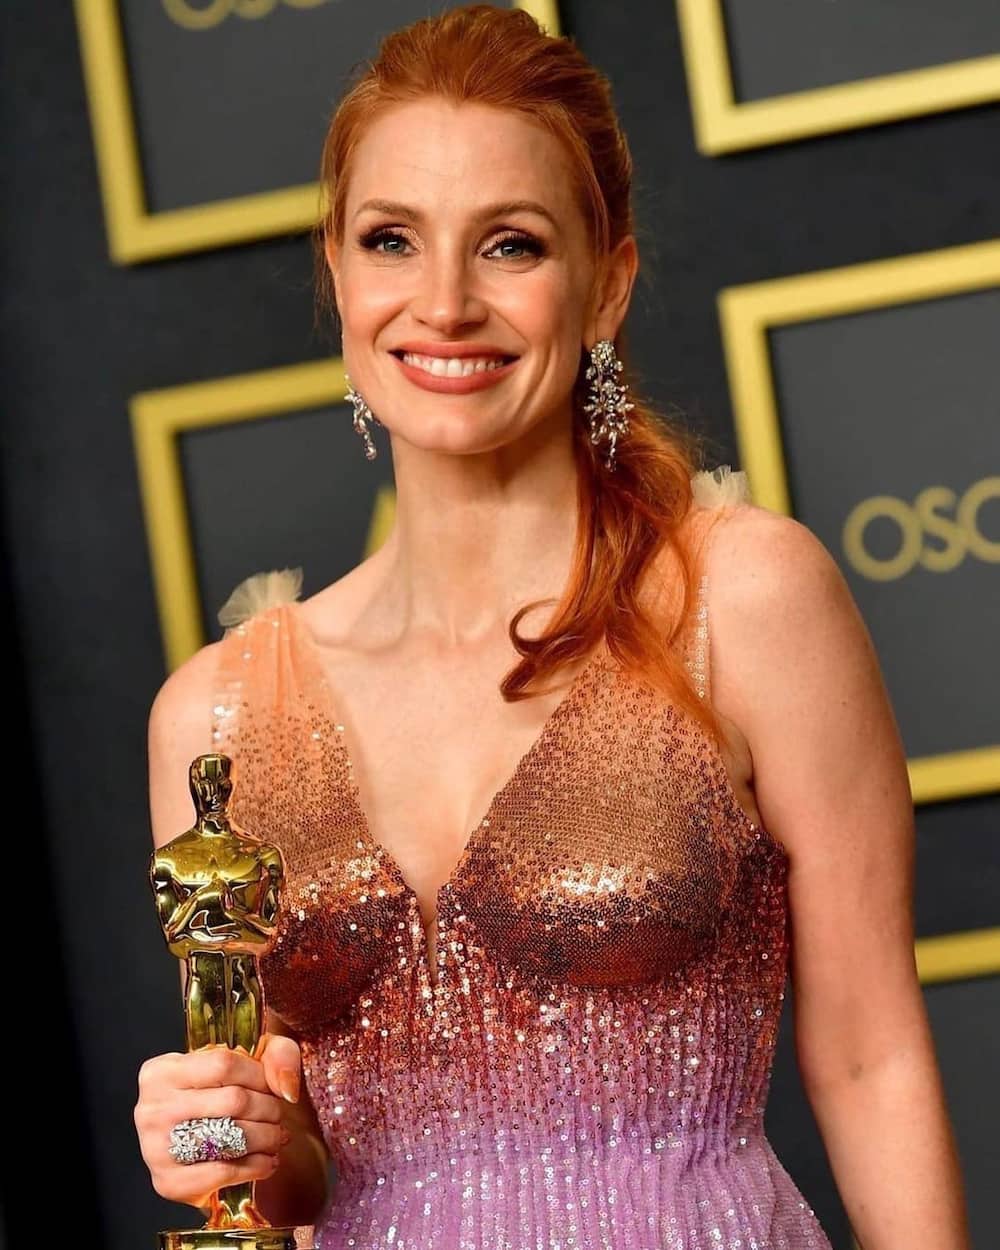 Jessica Chastain's net worth, age, husband, movies and tv shows, look alike, worth